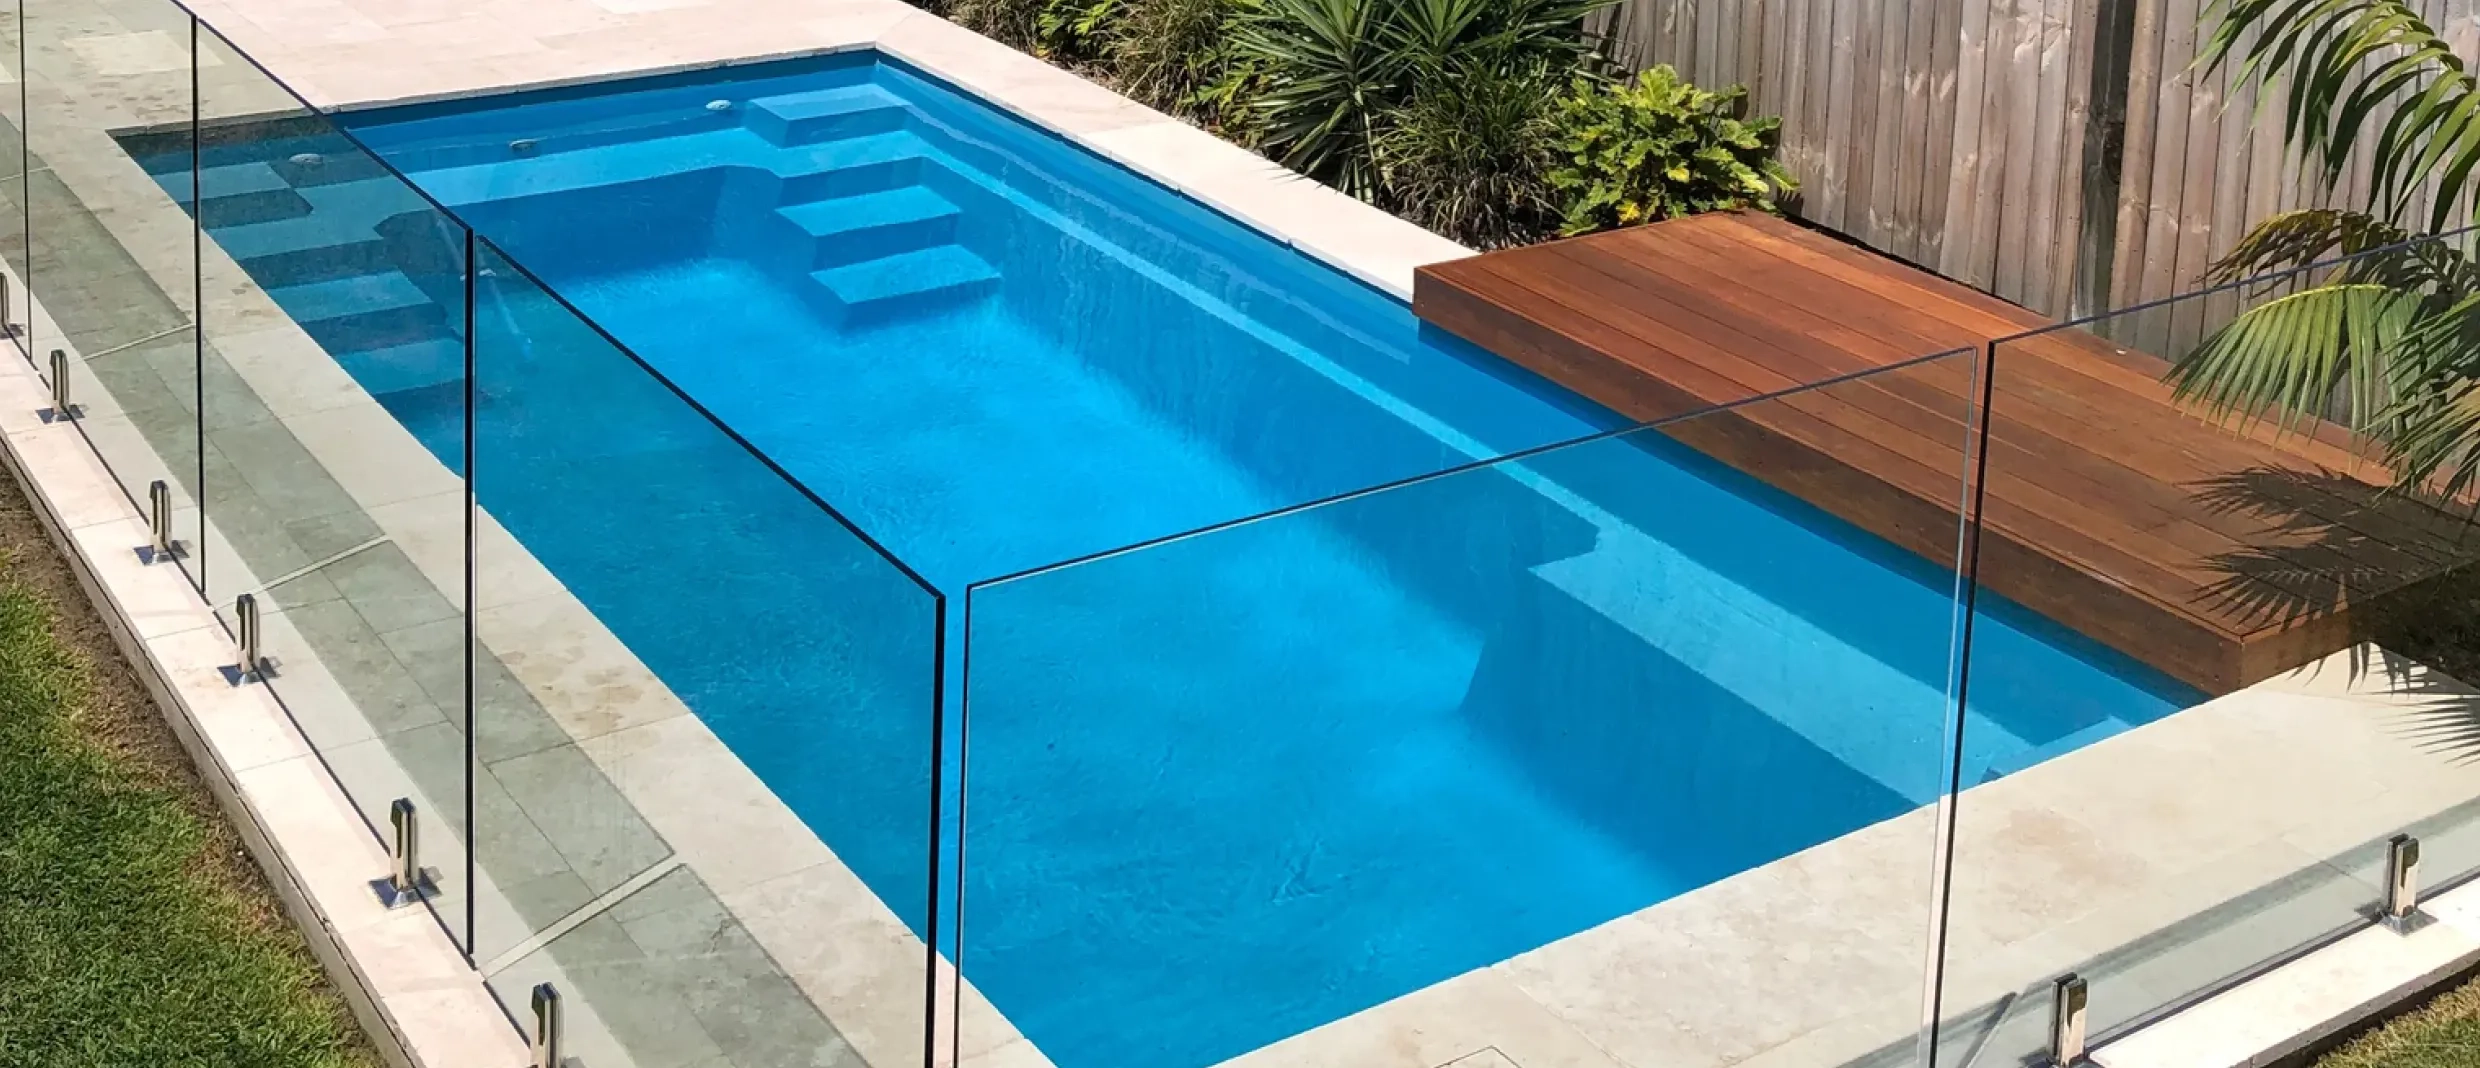  What To Expect When You Buy a DIY Fibreglass Pool Kit